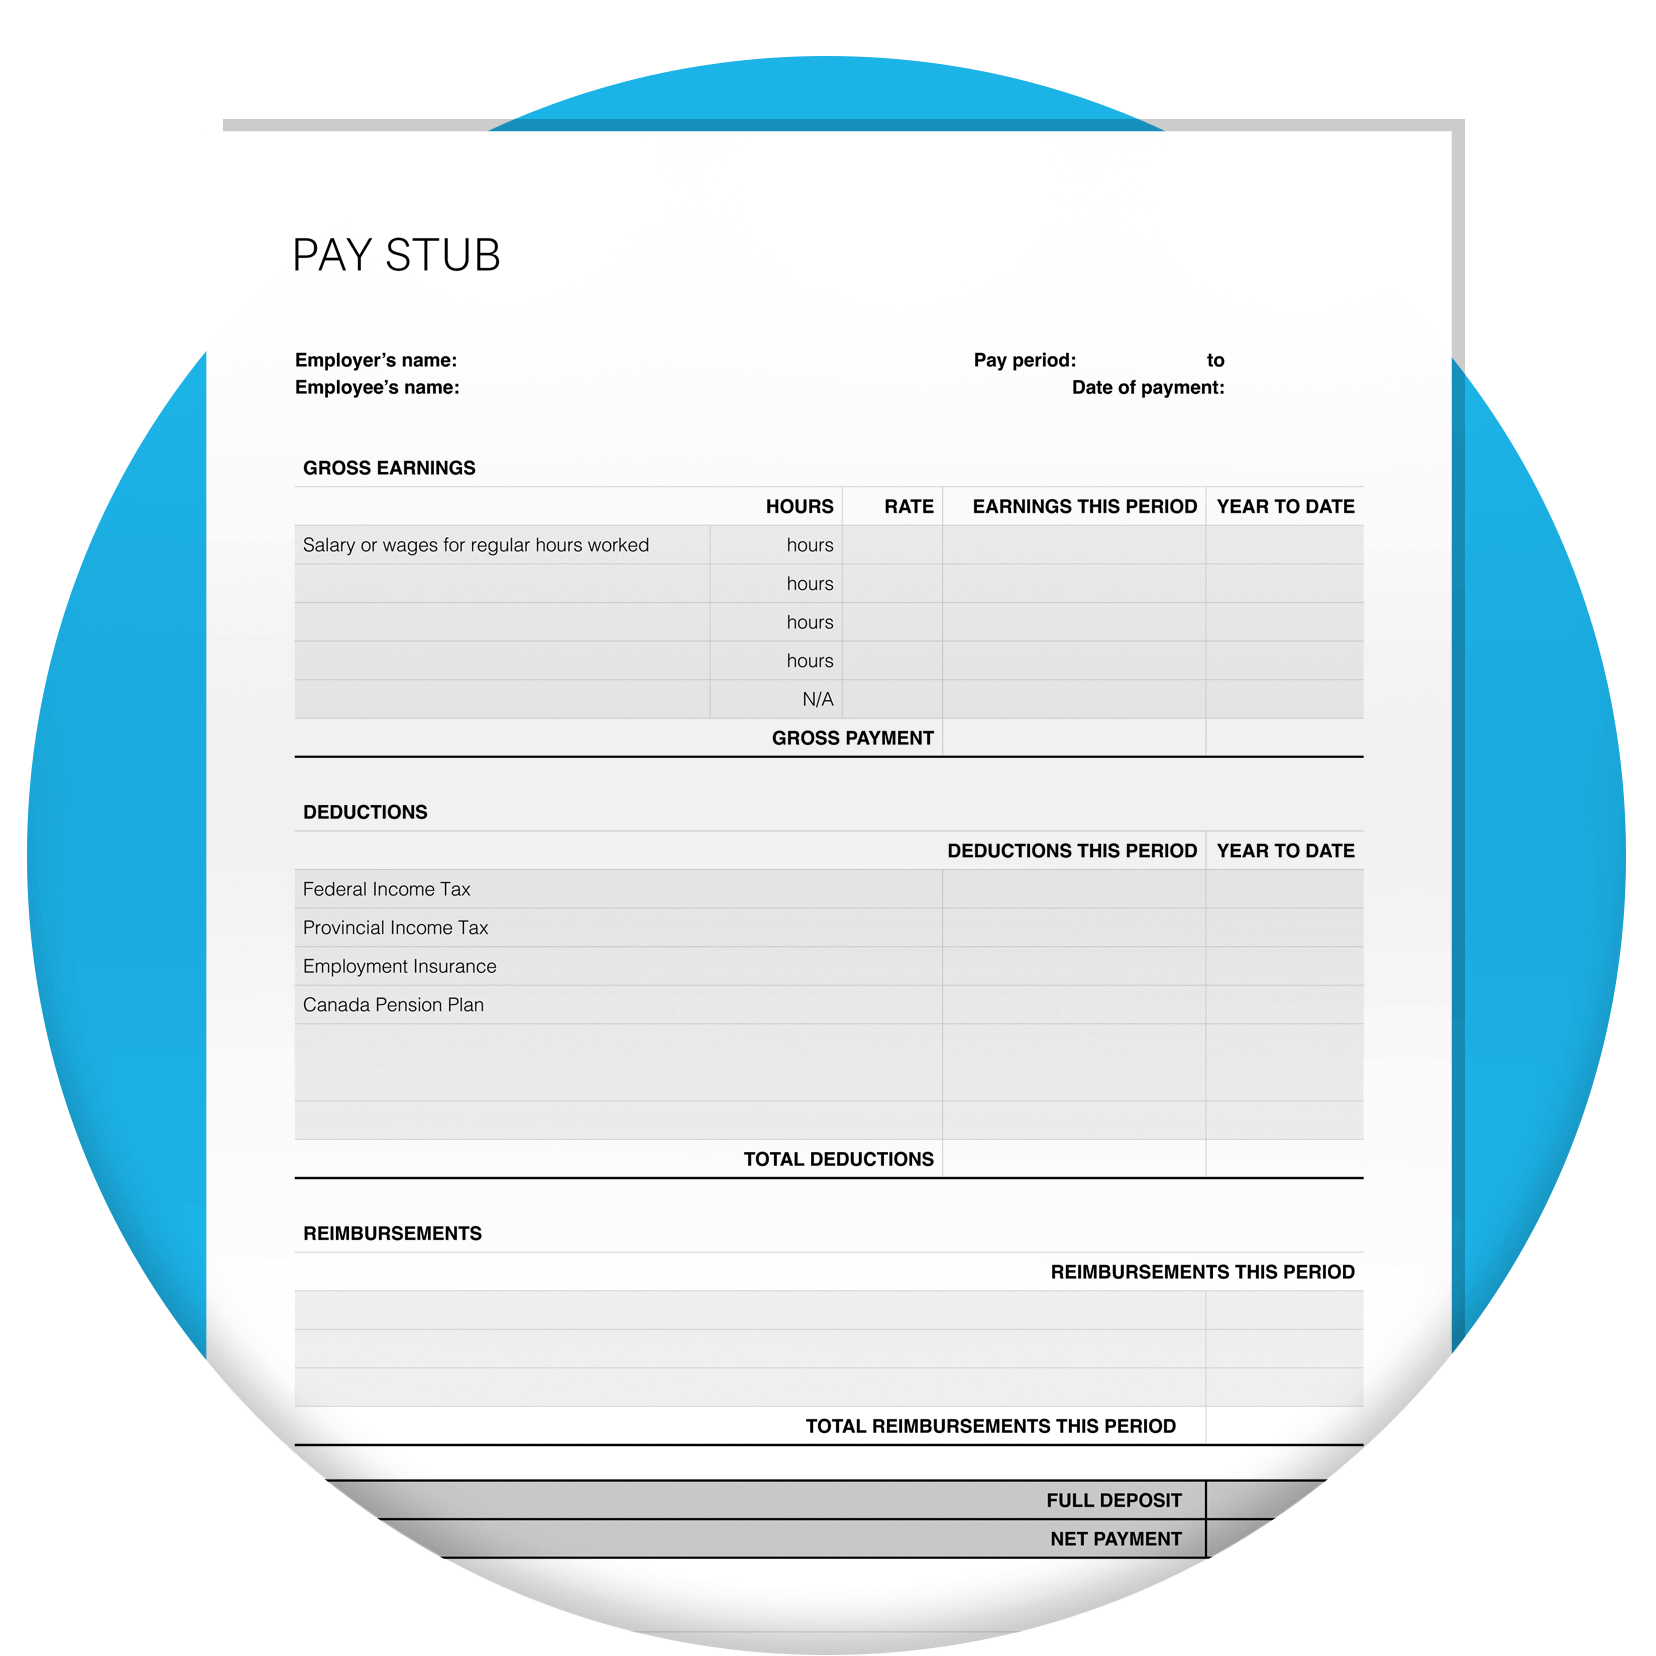 Pay stub template with blank fields for users to fill out